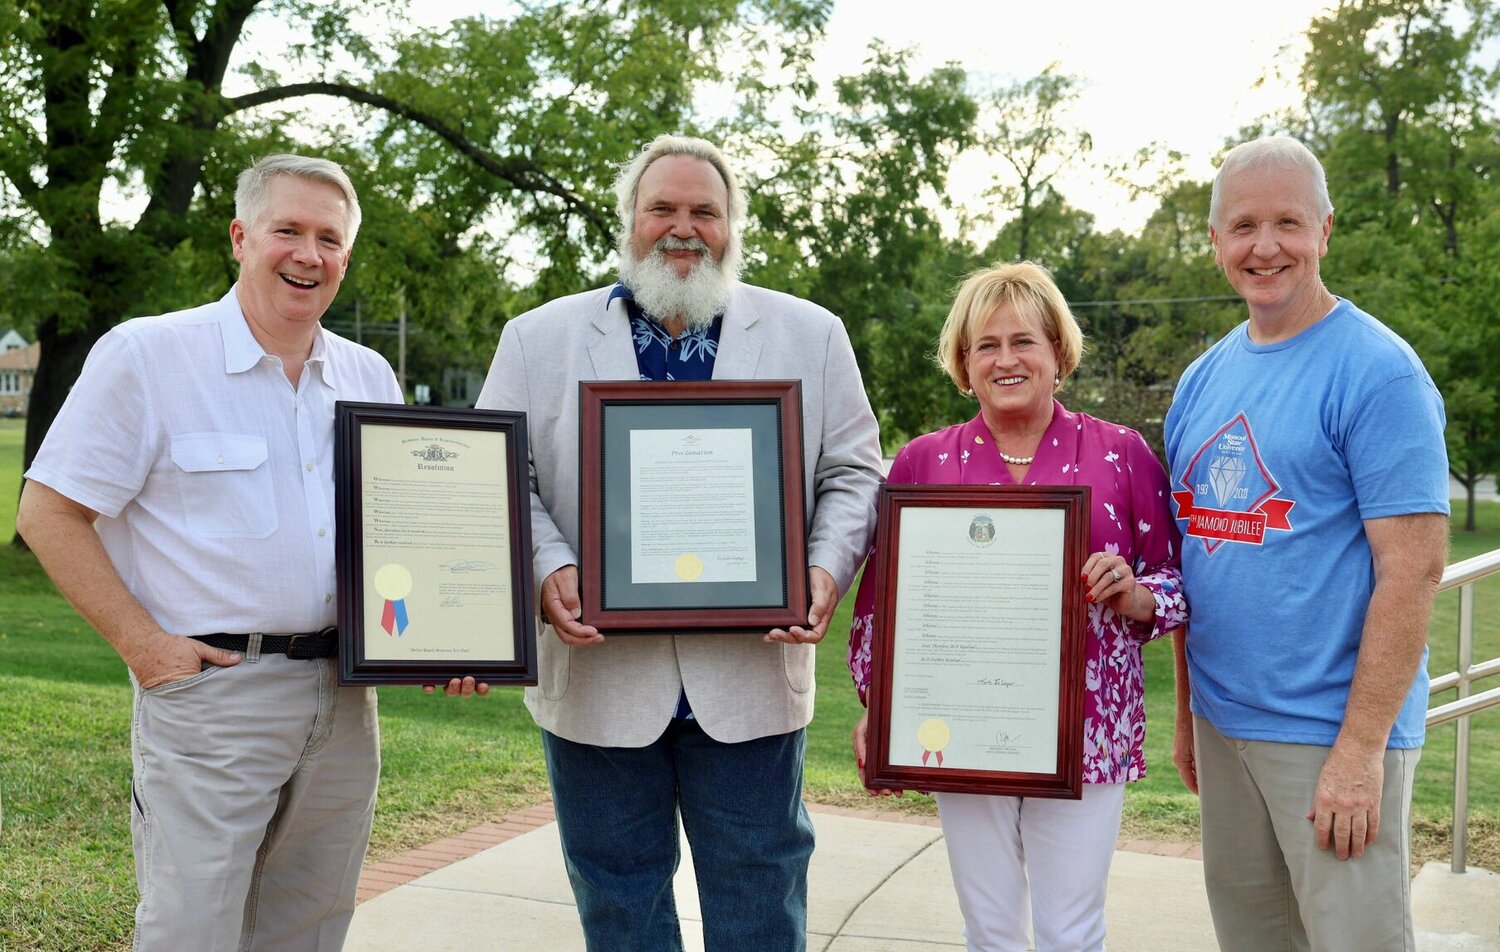 Proclamations from the Missouri State Senate, Missouri House of Representatives and the City of West Plains recognizing Missouri State University-West Plains’ 60th anniversary were presented to Chancellor Dennis Lancaster during the 60th Diamond Jubilee celebration Sept. 16 at the amphitheater. On hand for the presentations were, from left, 154th District State Rep. David Evans (R-West Plains), West Plains Mayor Mike Topliff, 33rd District State Sen. Karla Eslinger (R-Wasola) and Lancaster.